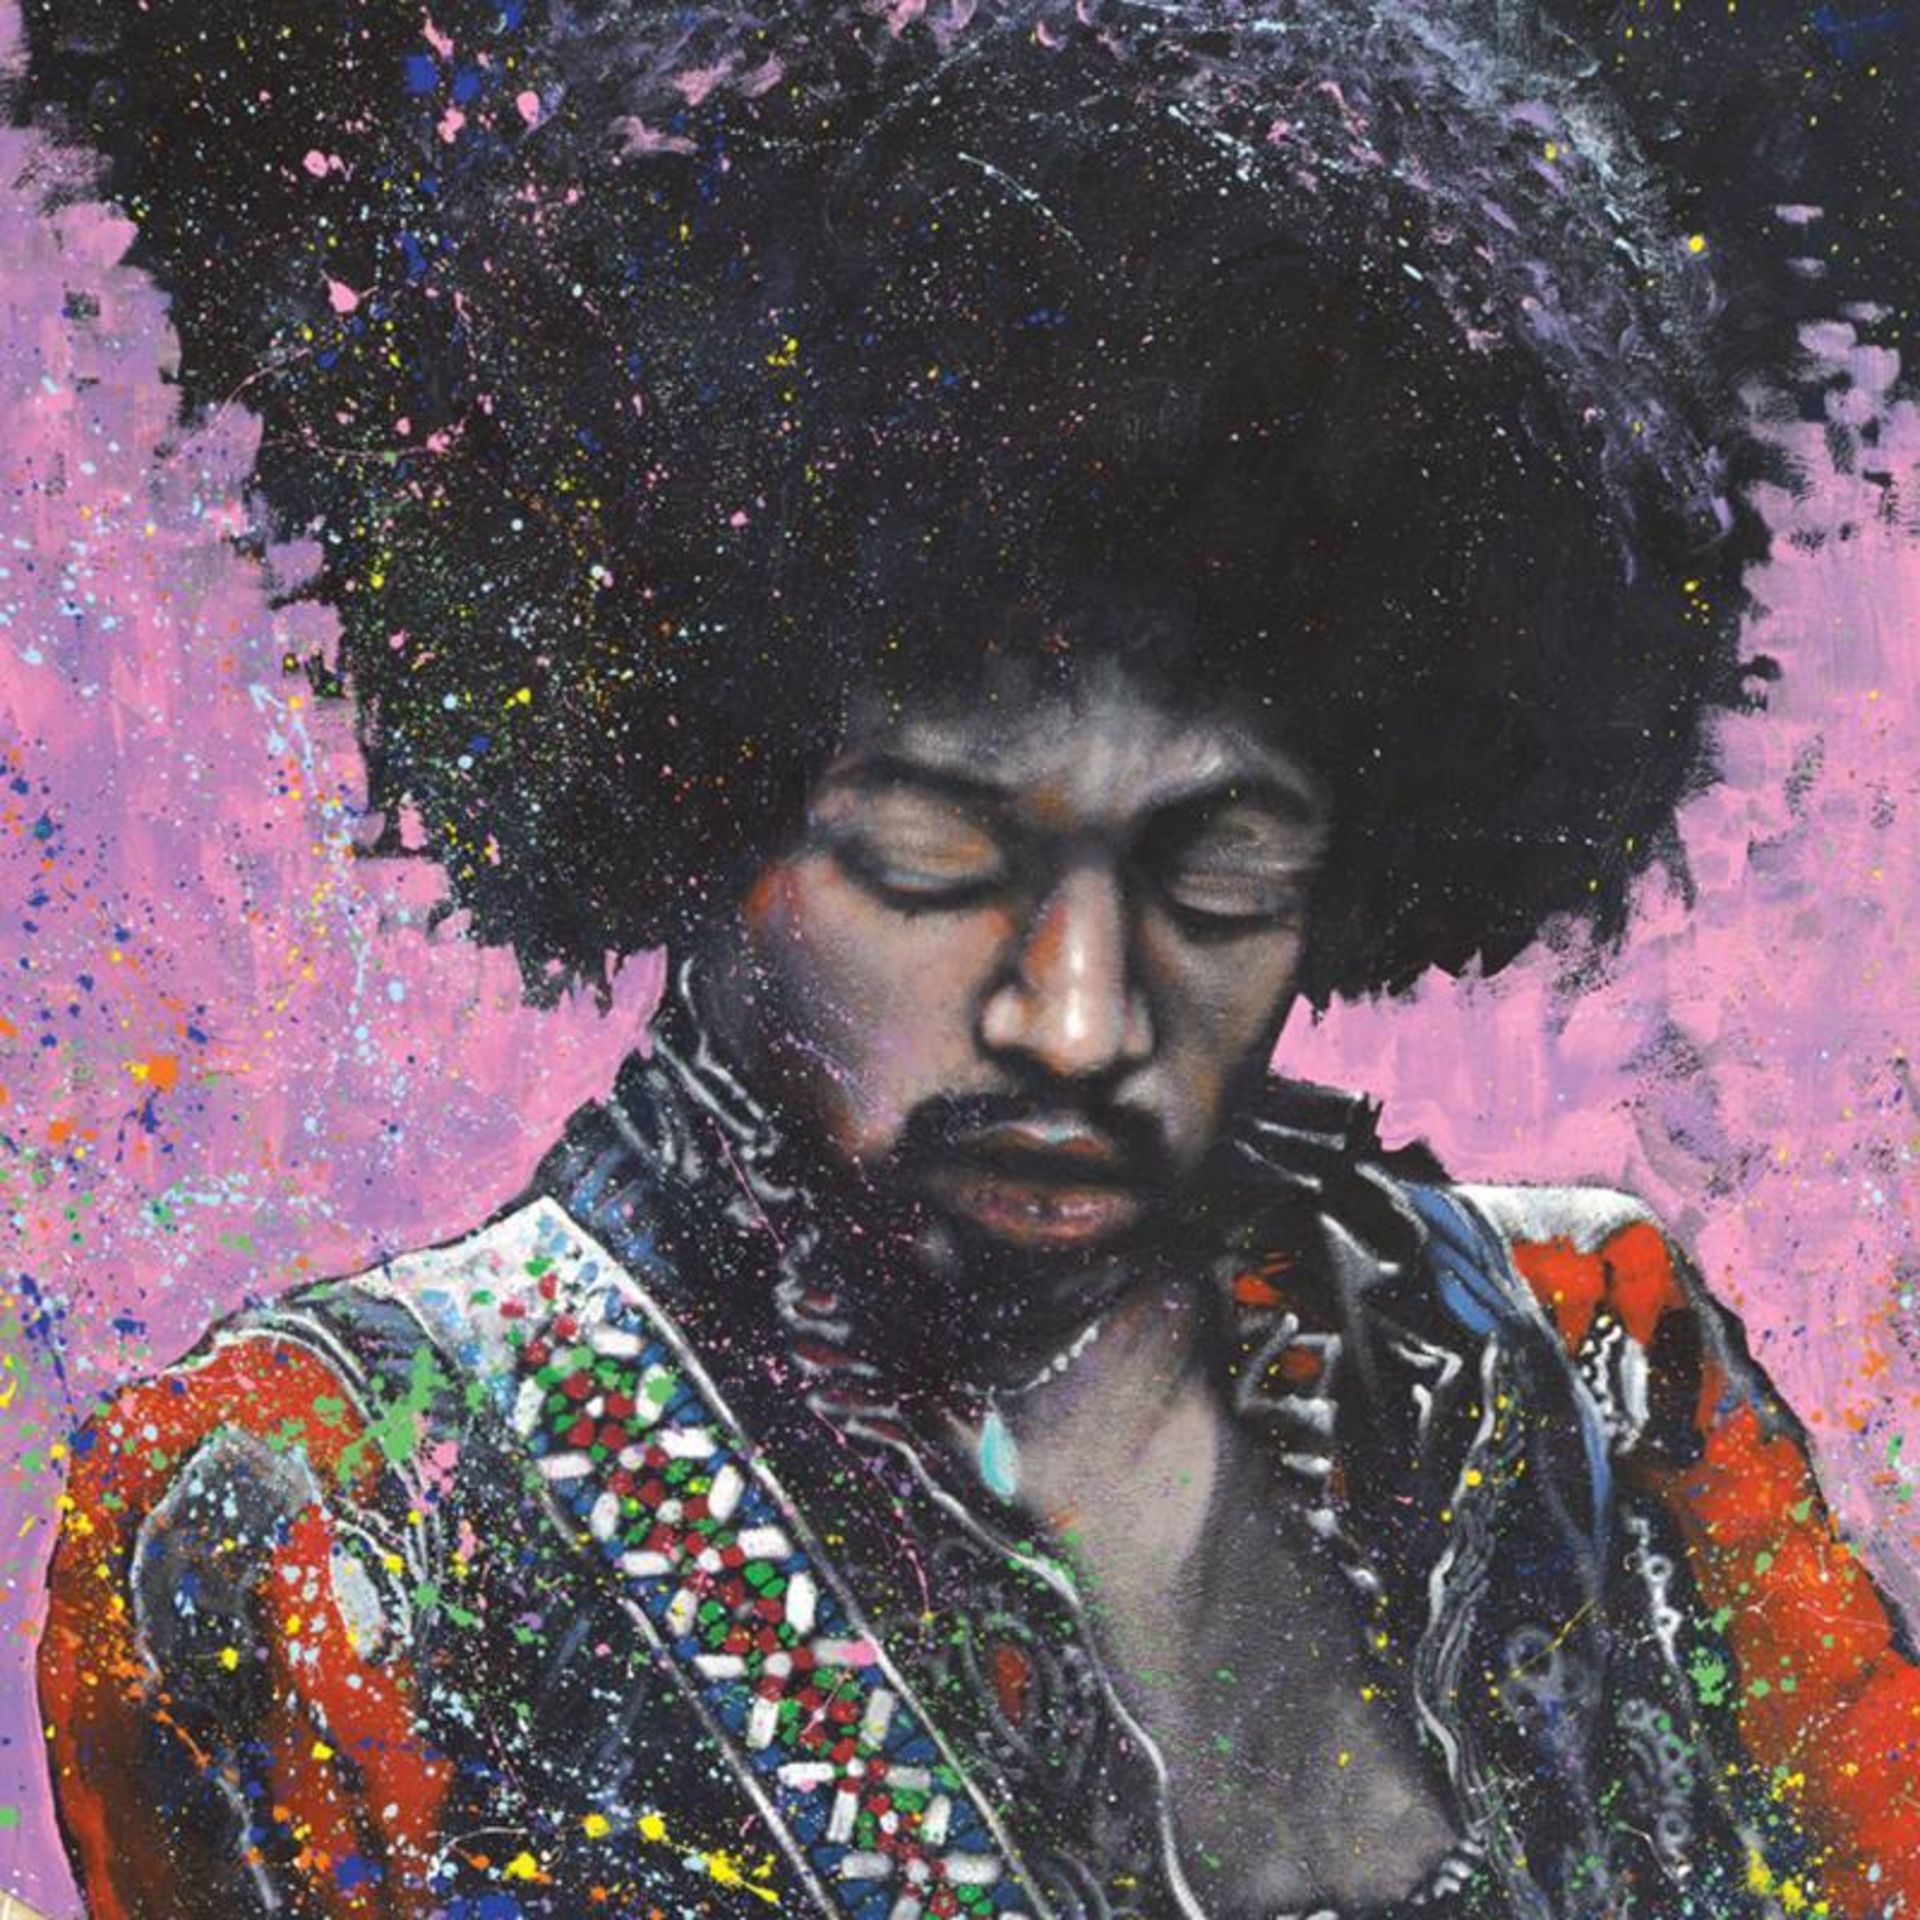 "Jimi" Limited Edition Giclee on Canvas by Stephen Fishwick, Numbered and Signed - Image 2 of 3